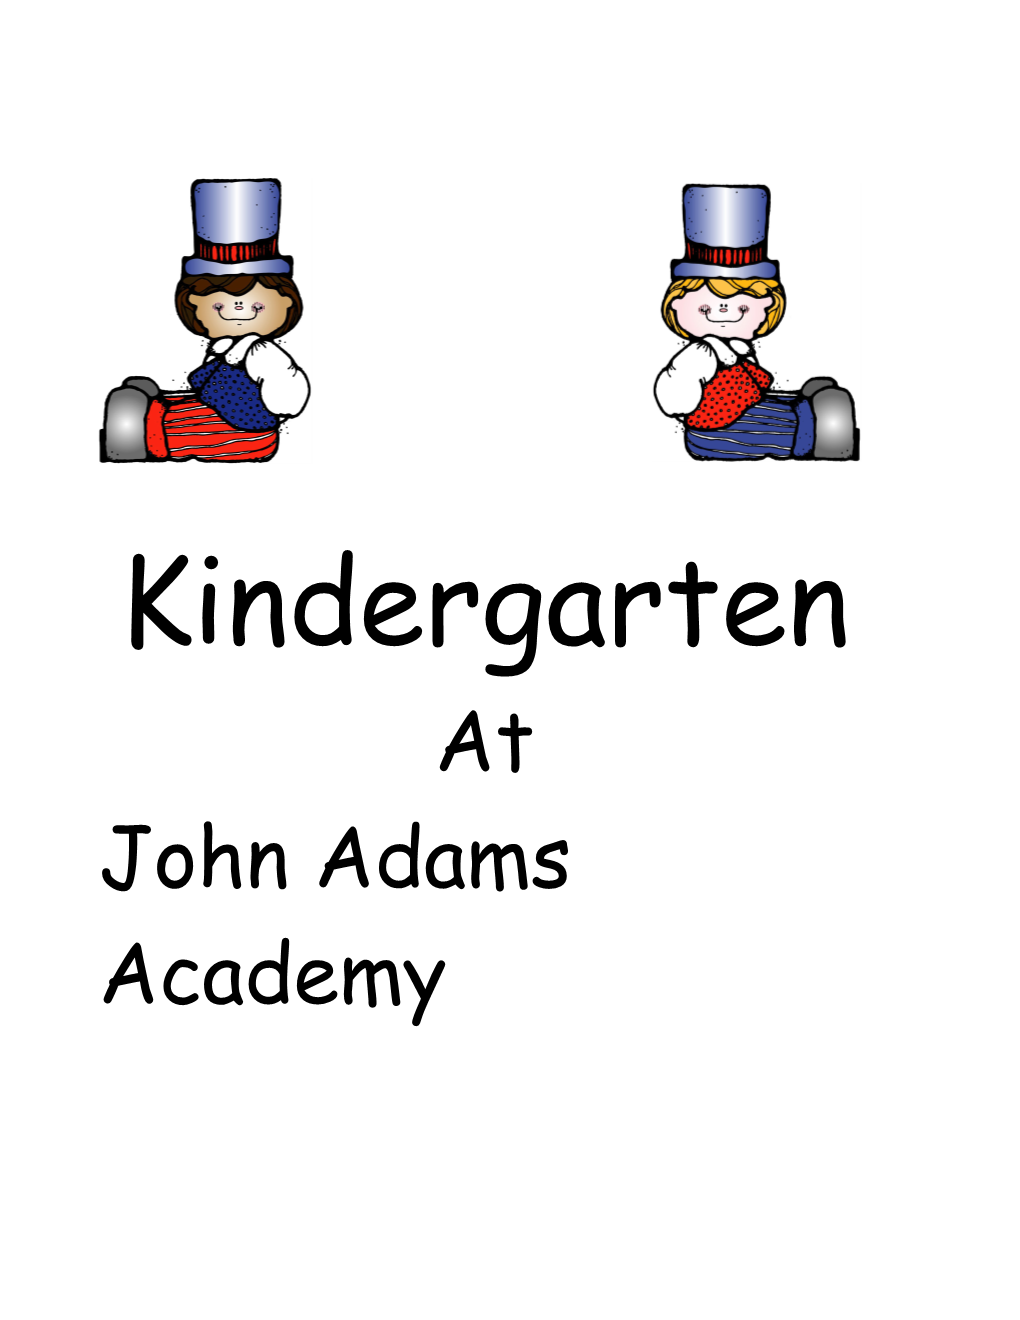 Kindergarten Students Will Demonstrate an Understanding and a Working Knowledge in The